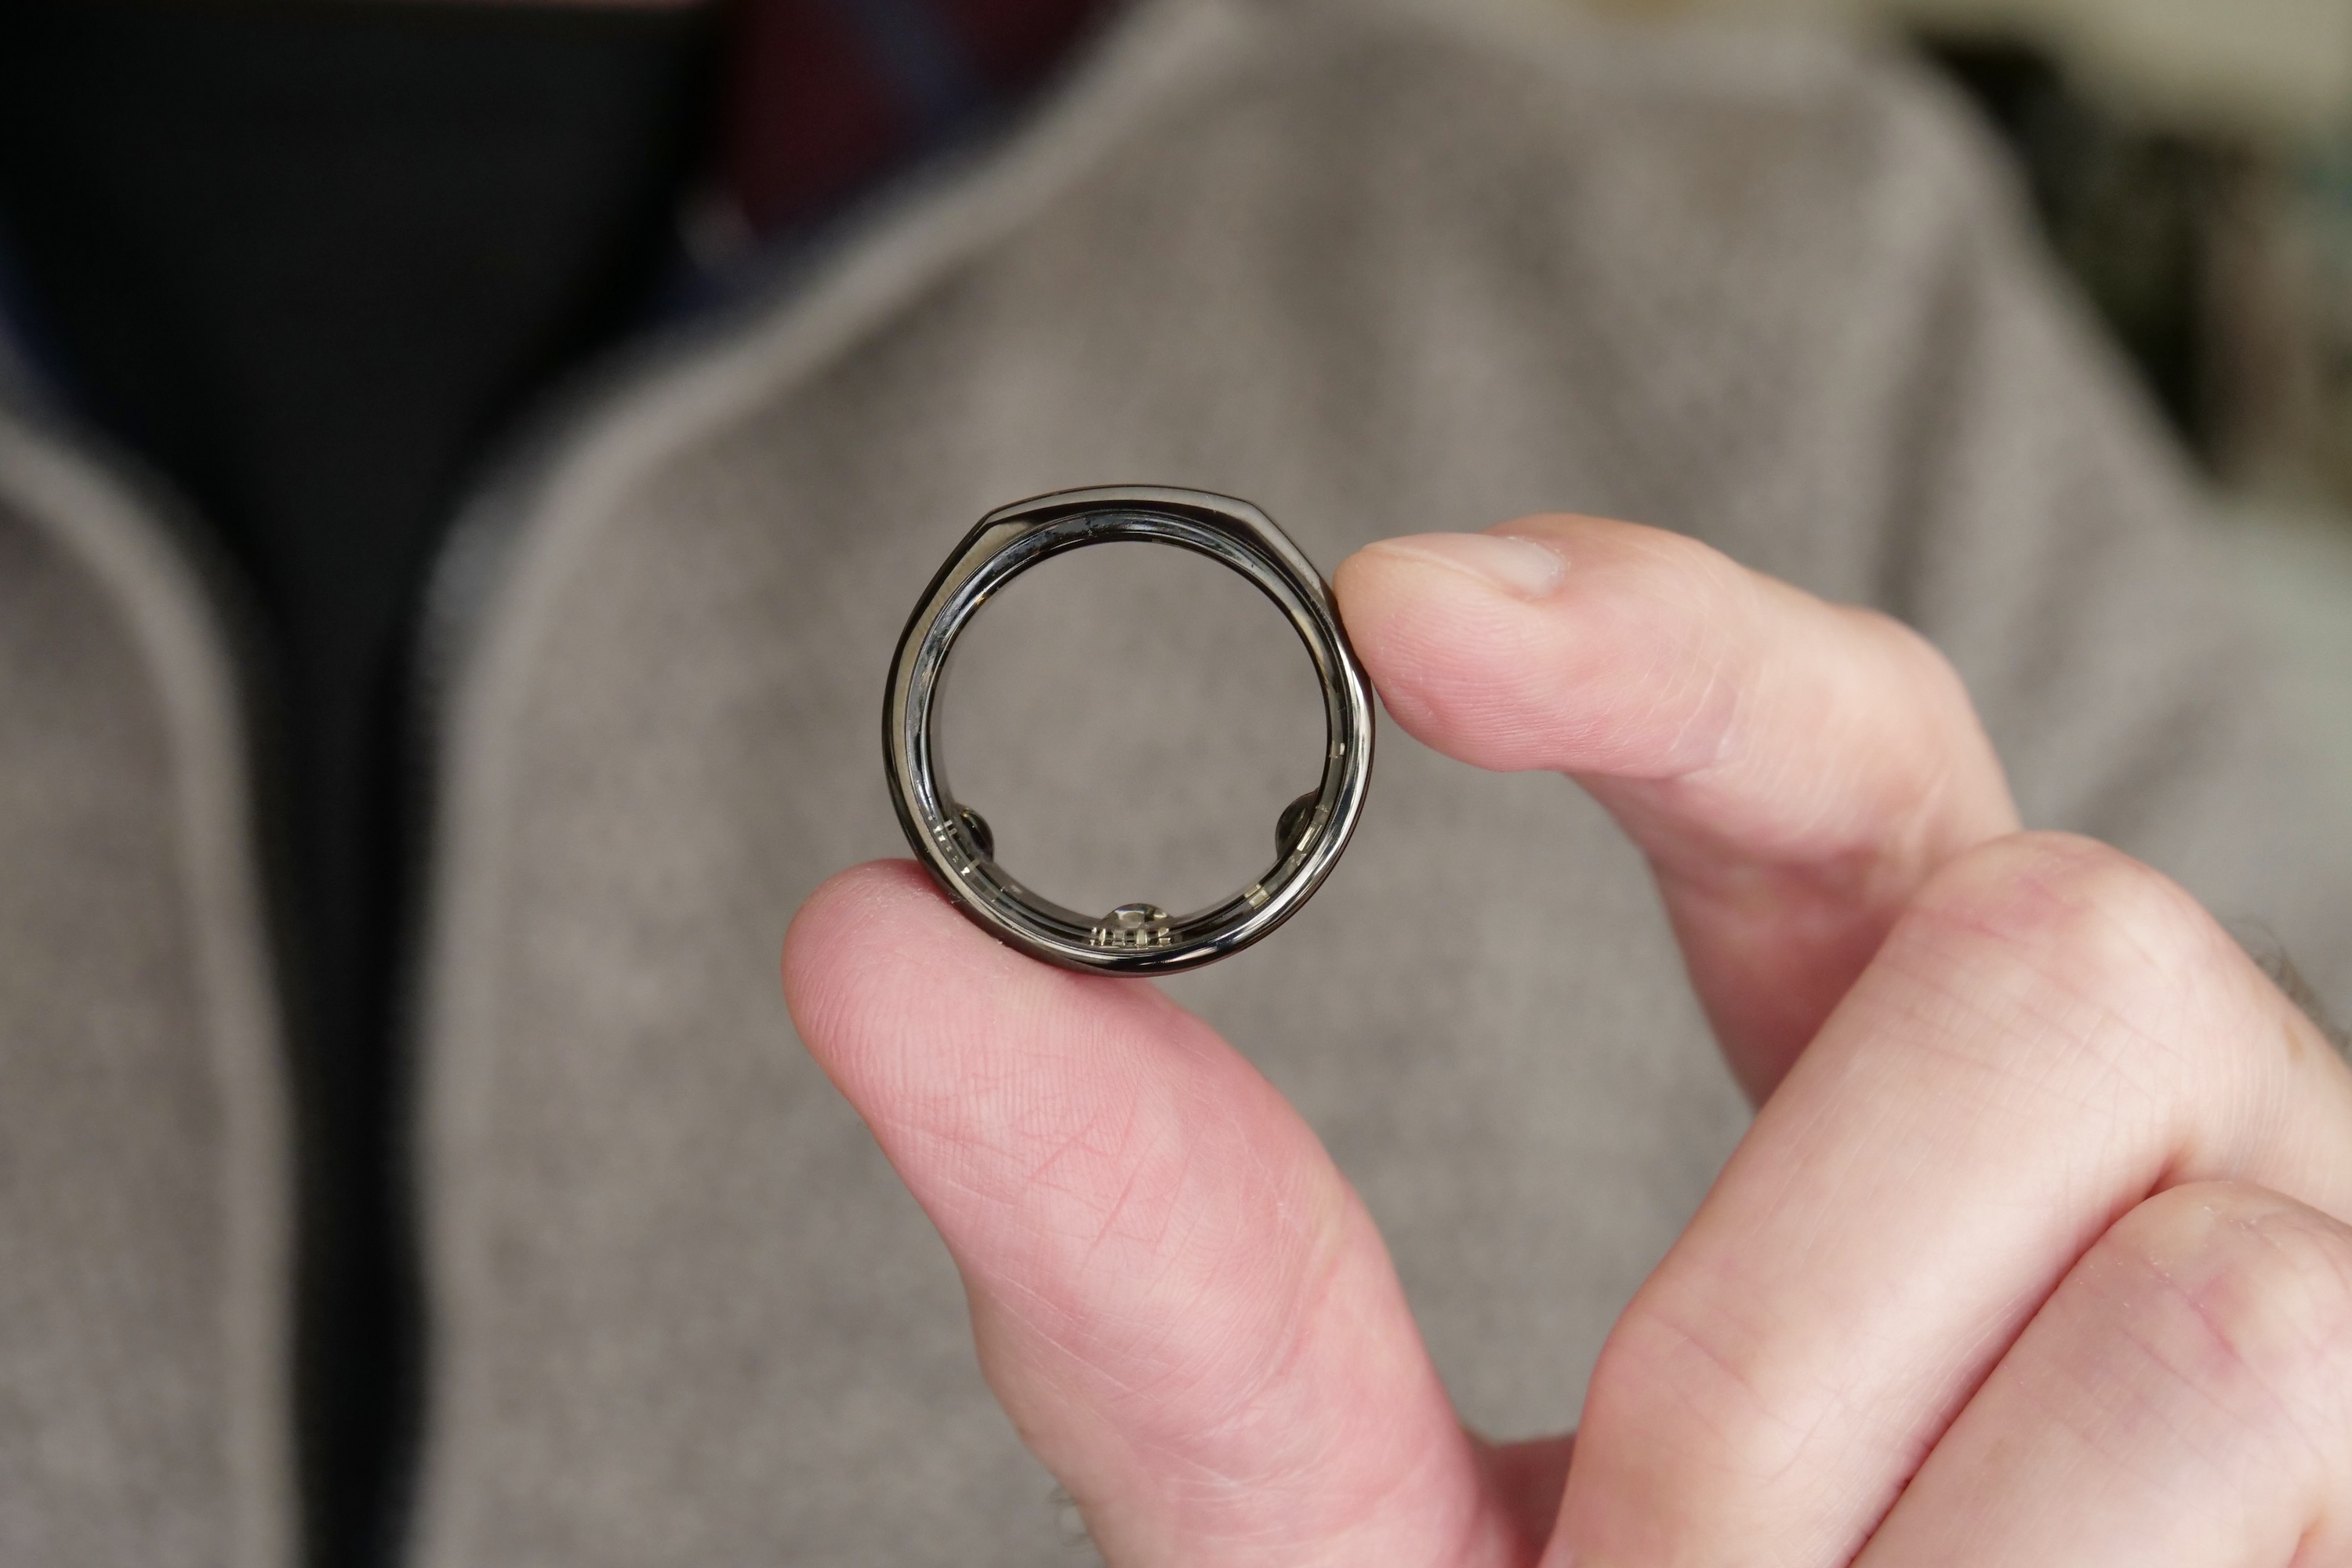 Oura's Fitness Ring Is Making Waves In The Wearables Industry | The  Healthcare Technology Report.